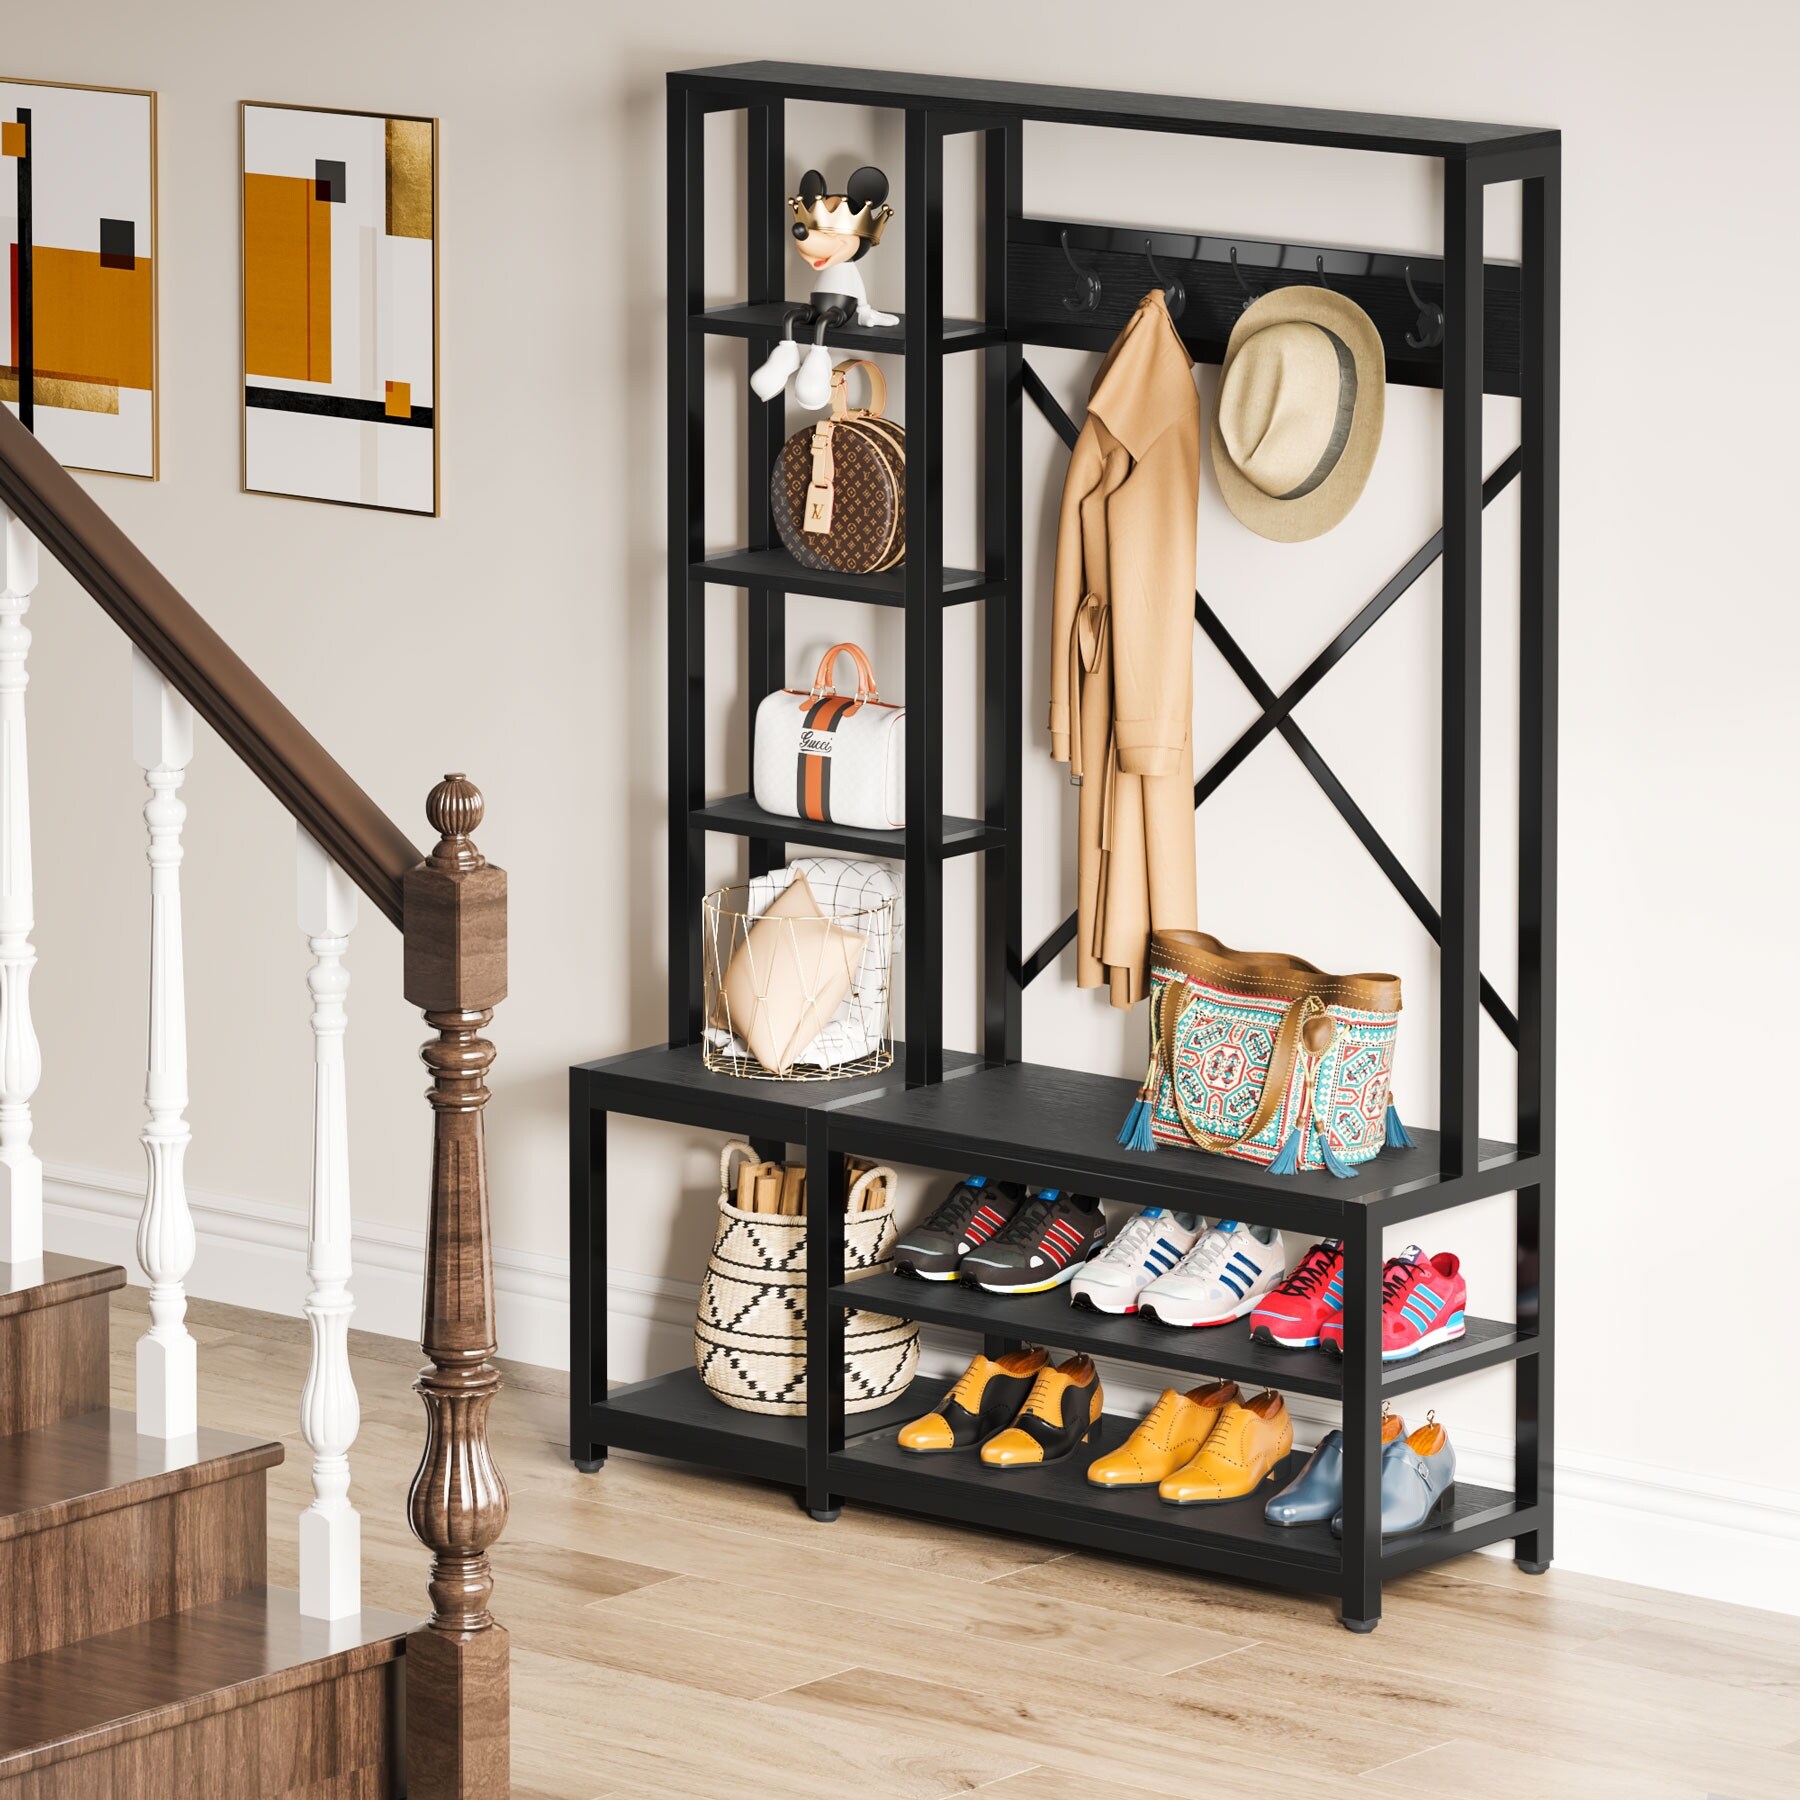 https://ak1.ostkcdn.com/images/products/is/images/direct/d3f0edfd489f1efd9cbabbd04dedeab7af7bcb85/4-in-1-Entryway-Hall-Tree-with-Side-Storage-Shelves-Industrial-Wooden-Entryway-Bench.jpg